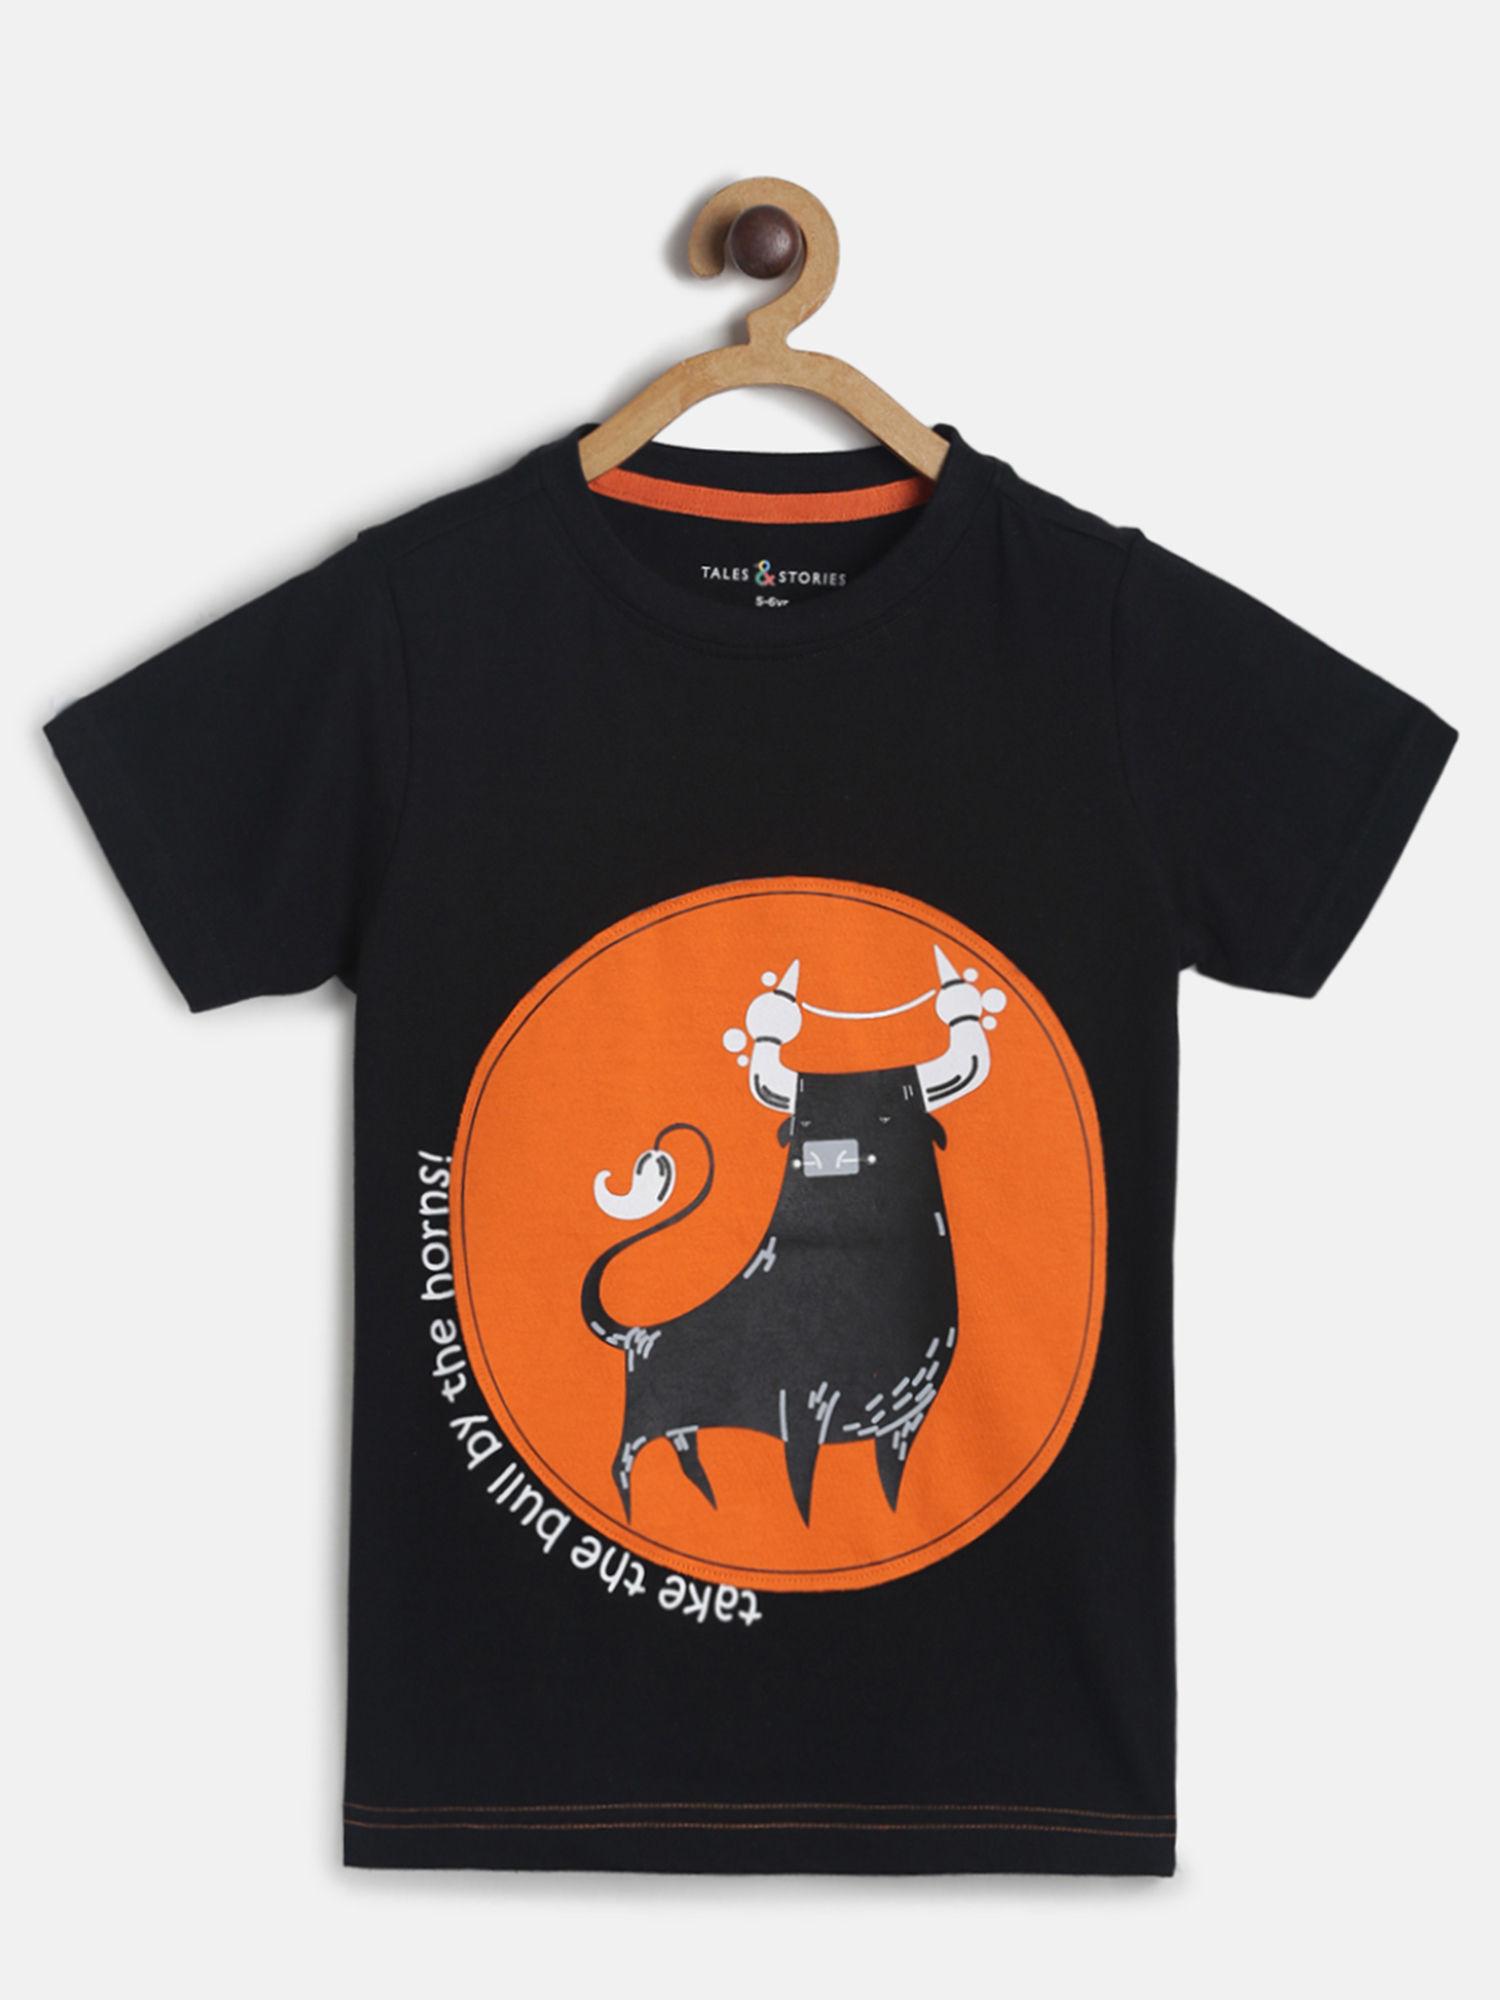 tales and stories black boys cotton printed t-shirt